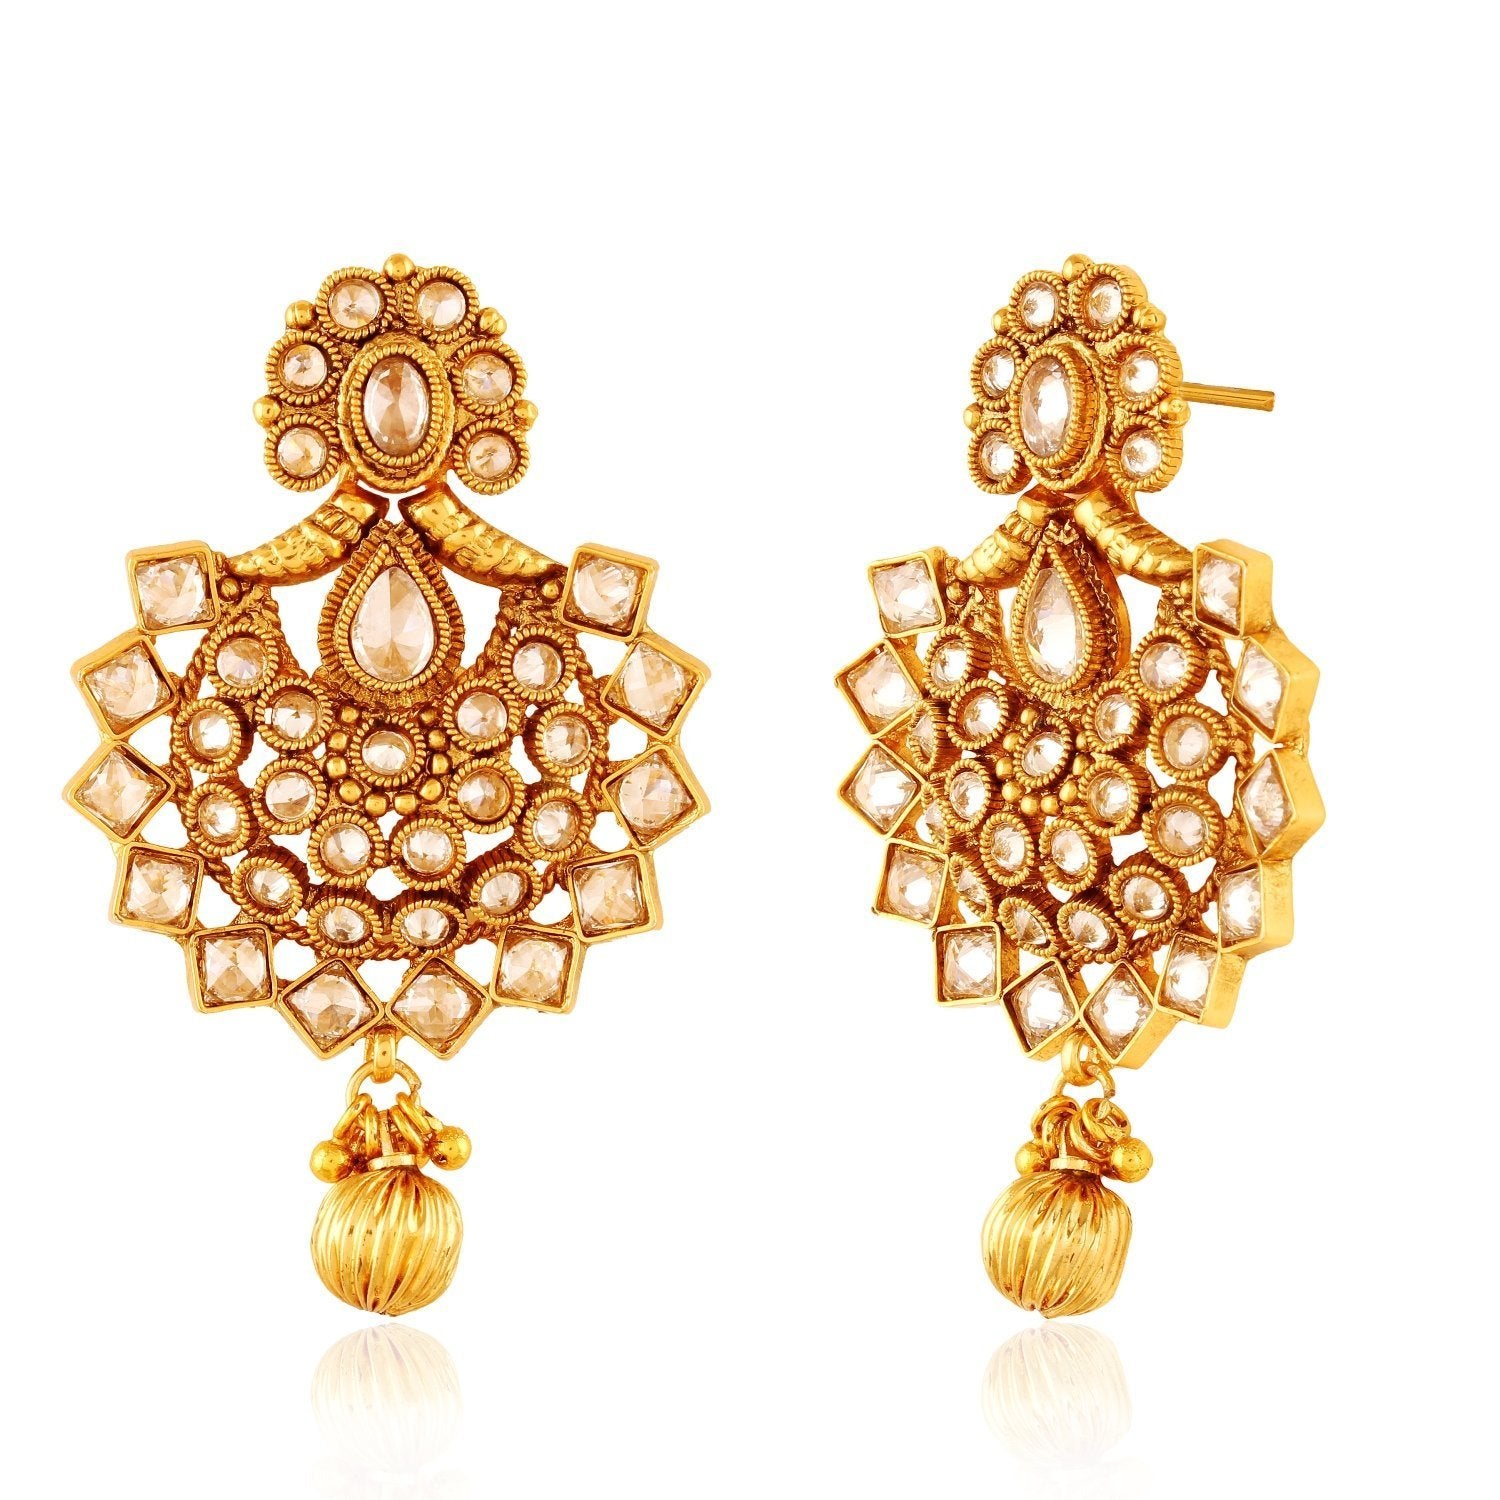 ACERJM958GW -AccessHer Ethnic Antique gold shaped stud earrings for women - access-her